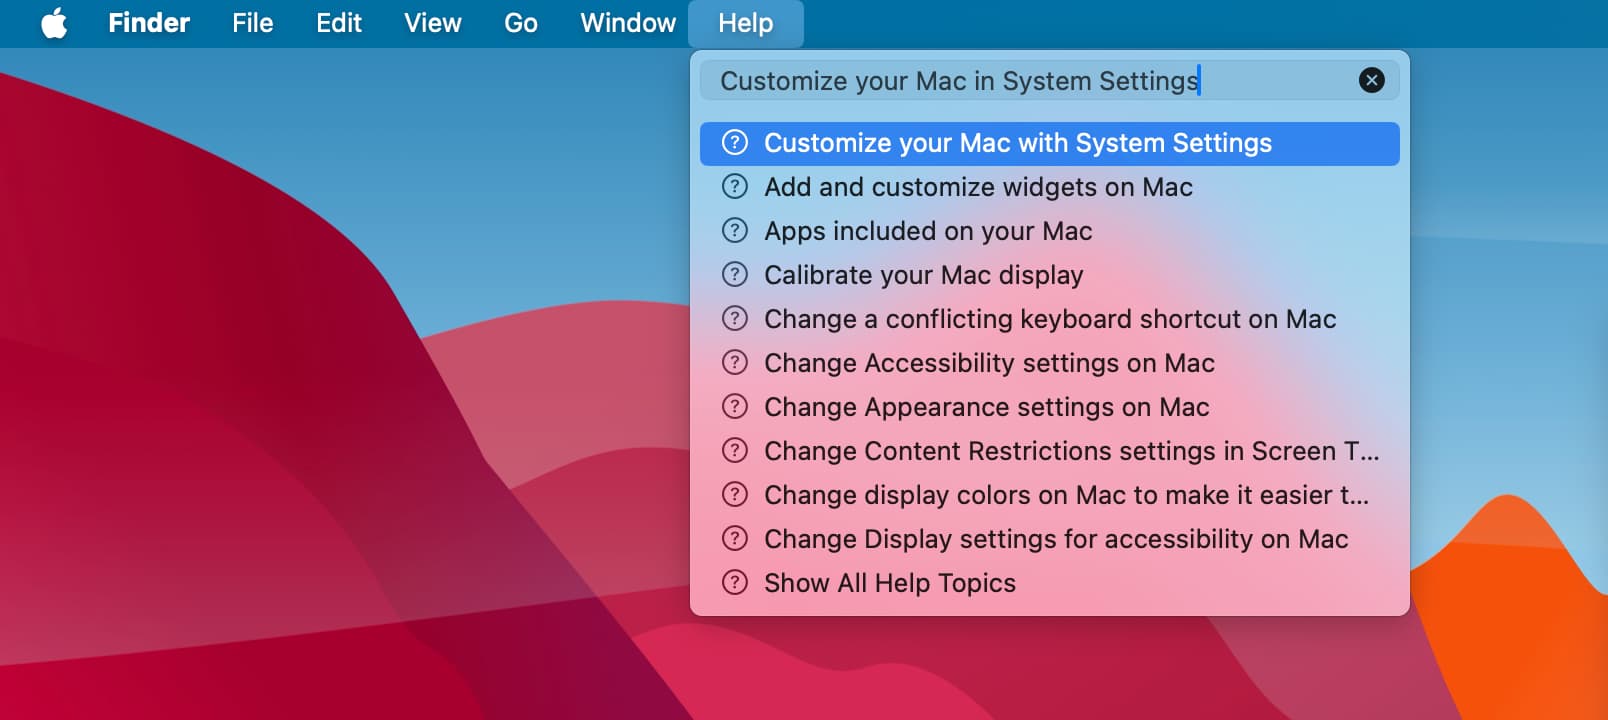 Search for Customize your Mac in System Settings in Finder Help